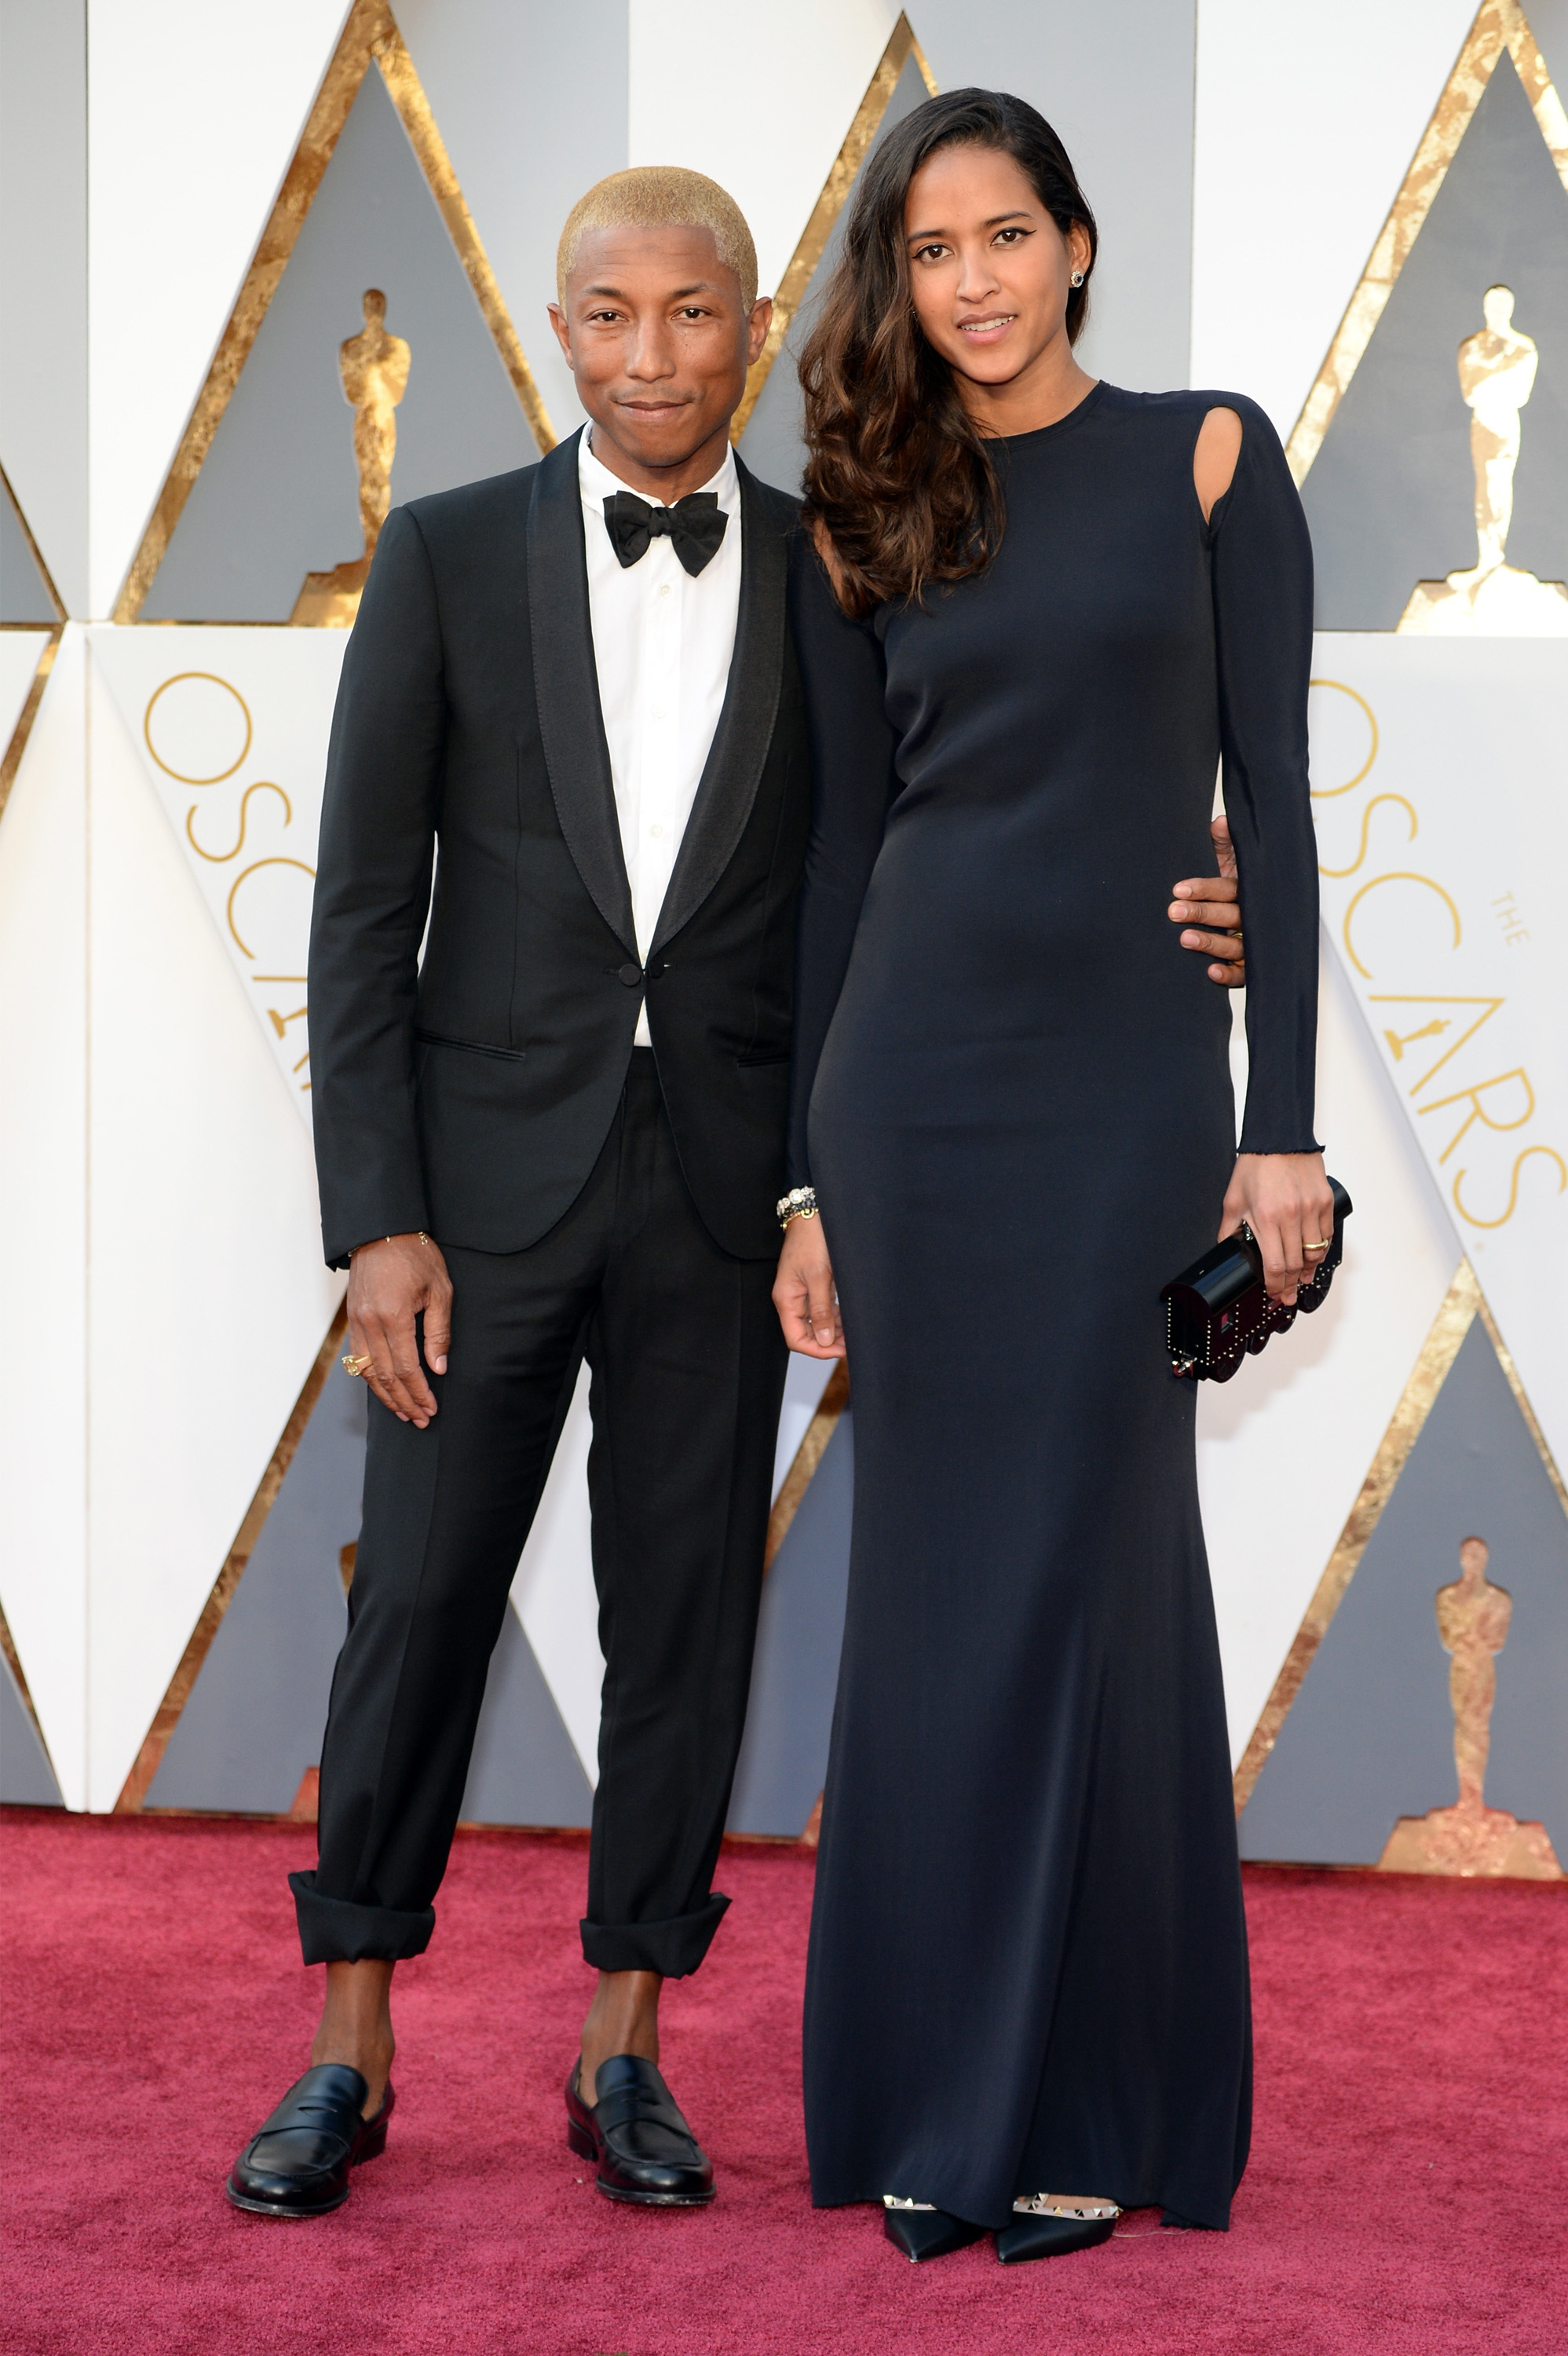 Pharrell Williams and Helen Lasichanh attend the 88th Annual Academy Awards on Feb. 28, 2016 in Hollywood, Calif.